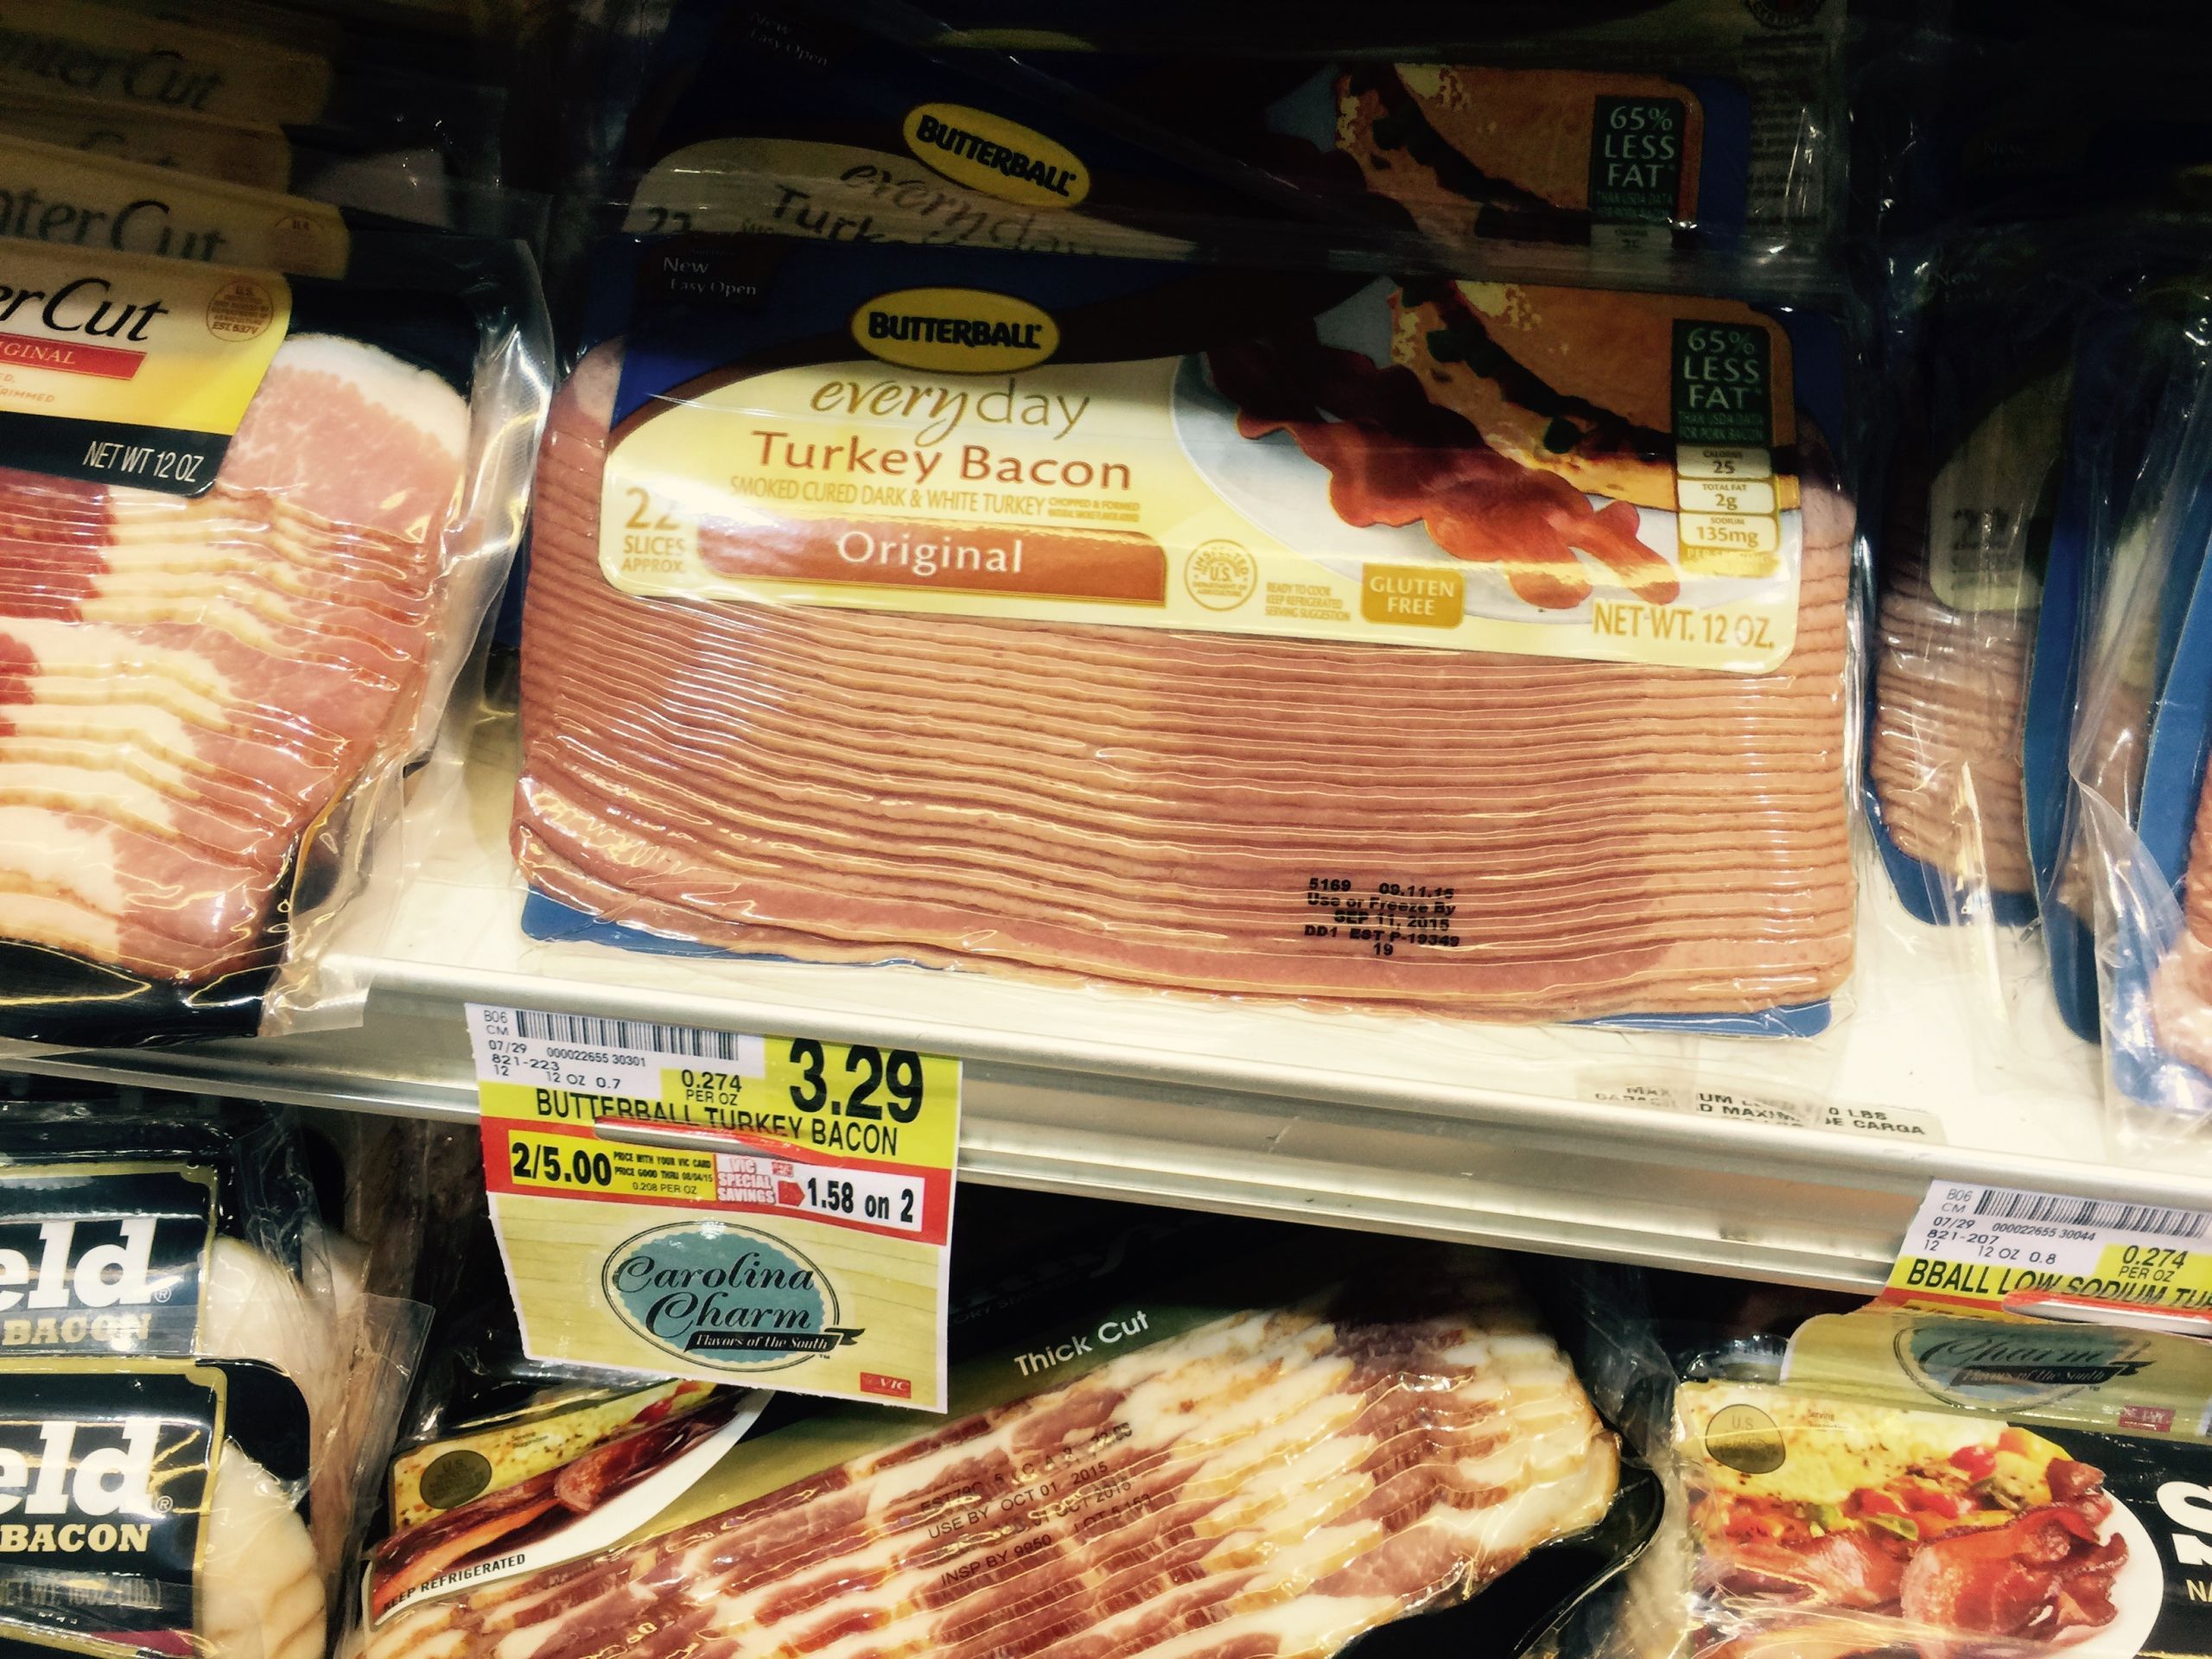 Harris Teeter Thanksgiving Dinner
 Butterball Turkey Bacon or Dinner Sausage $1 00 The